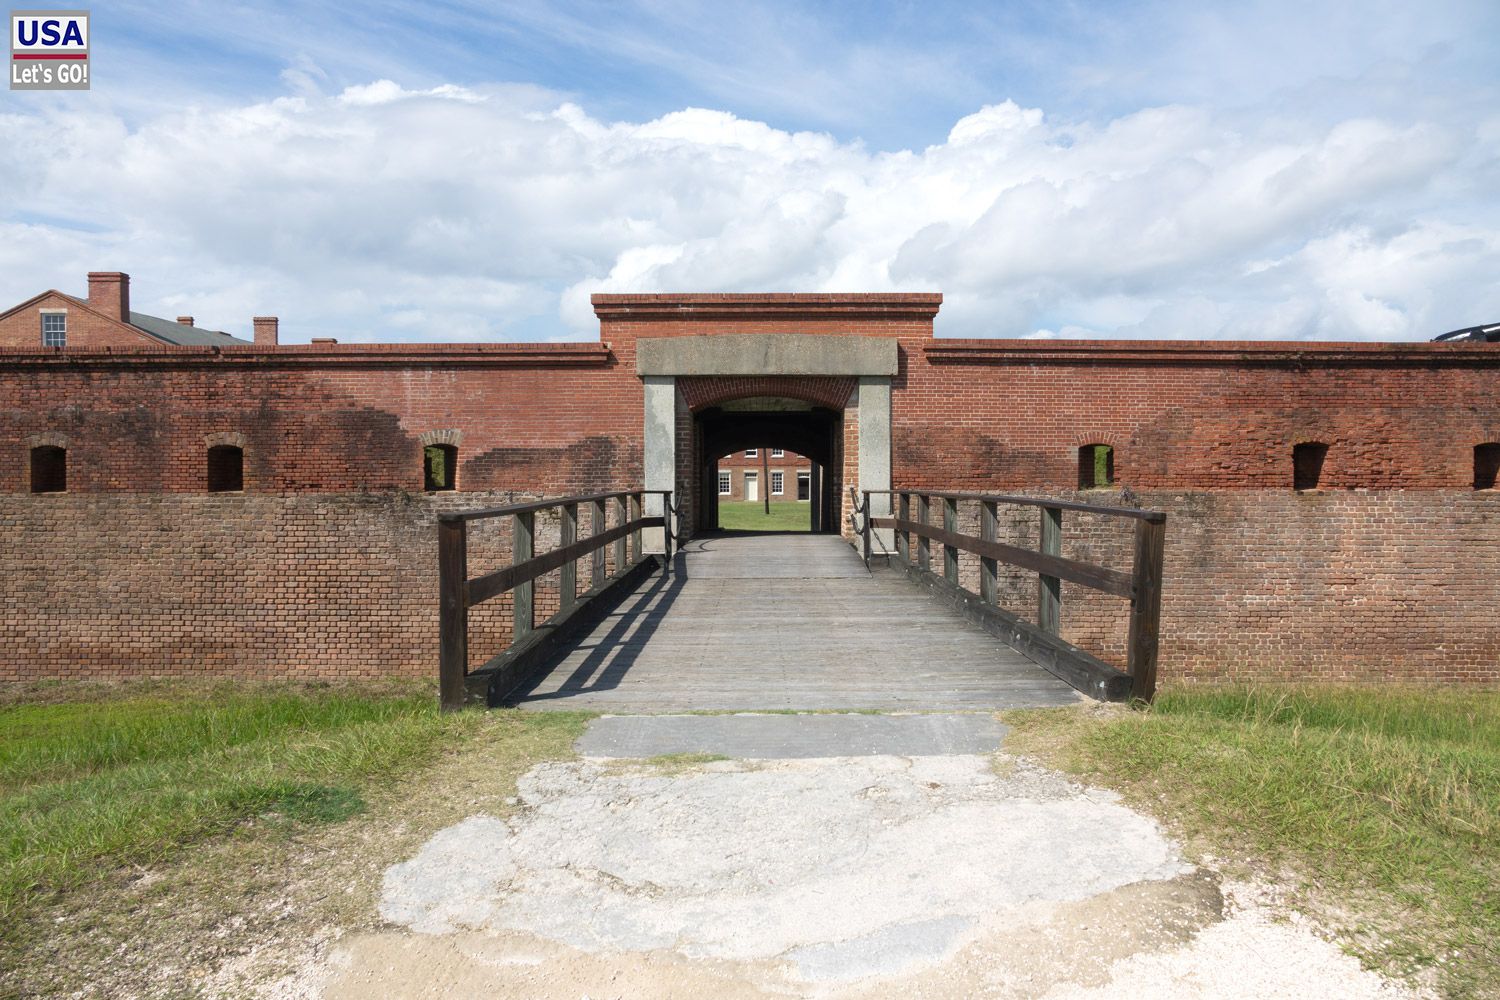 Fort Clinch SP